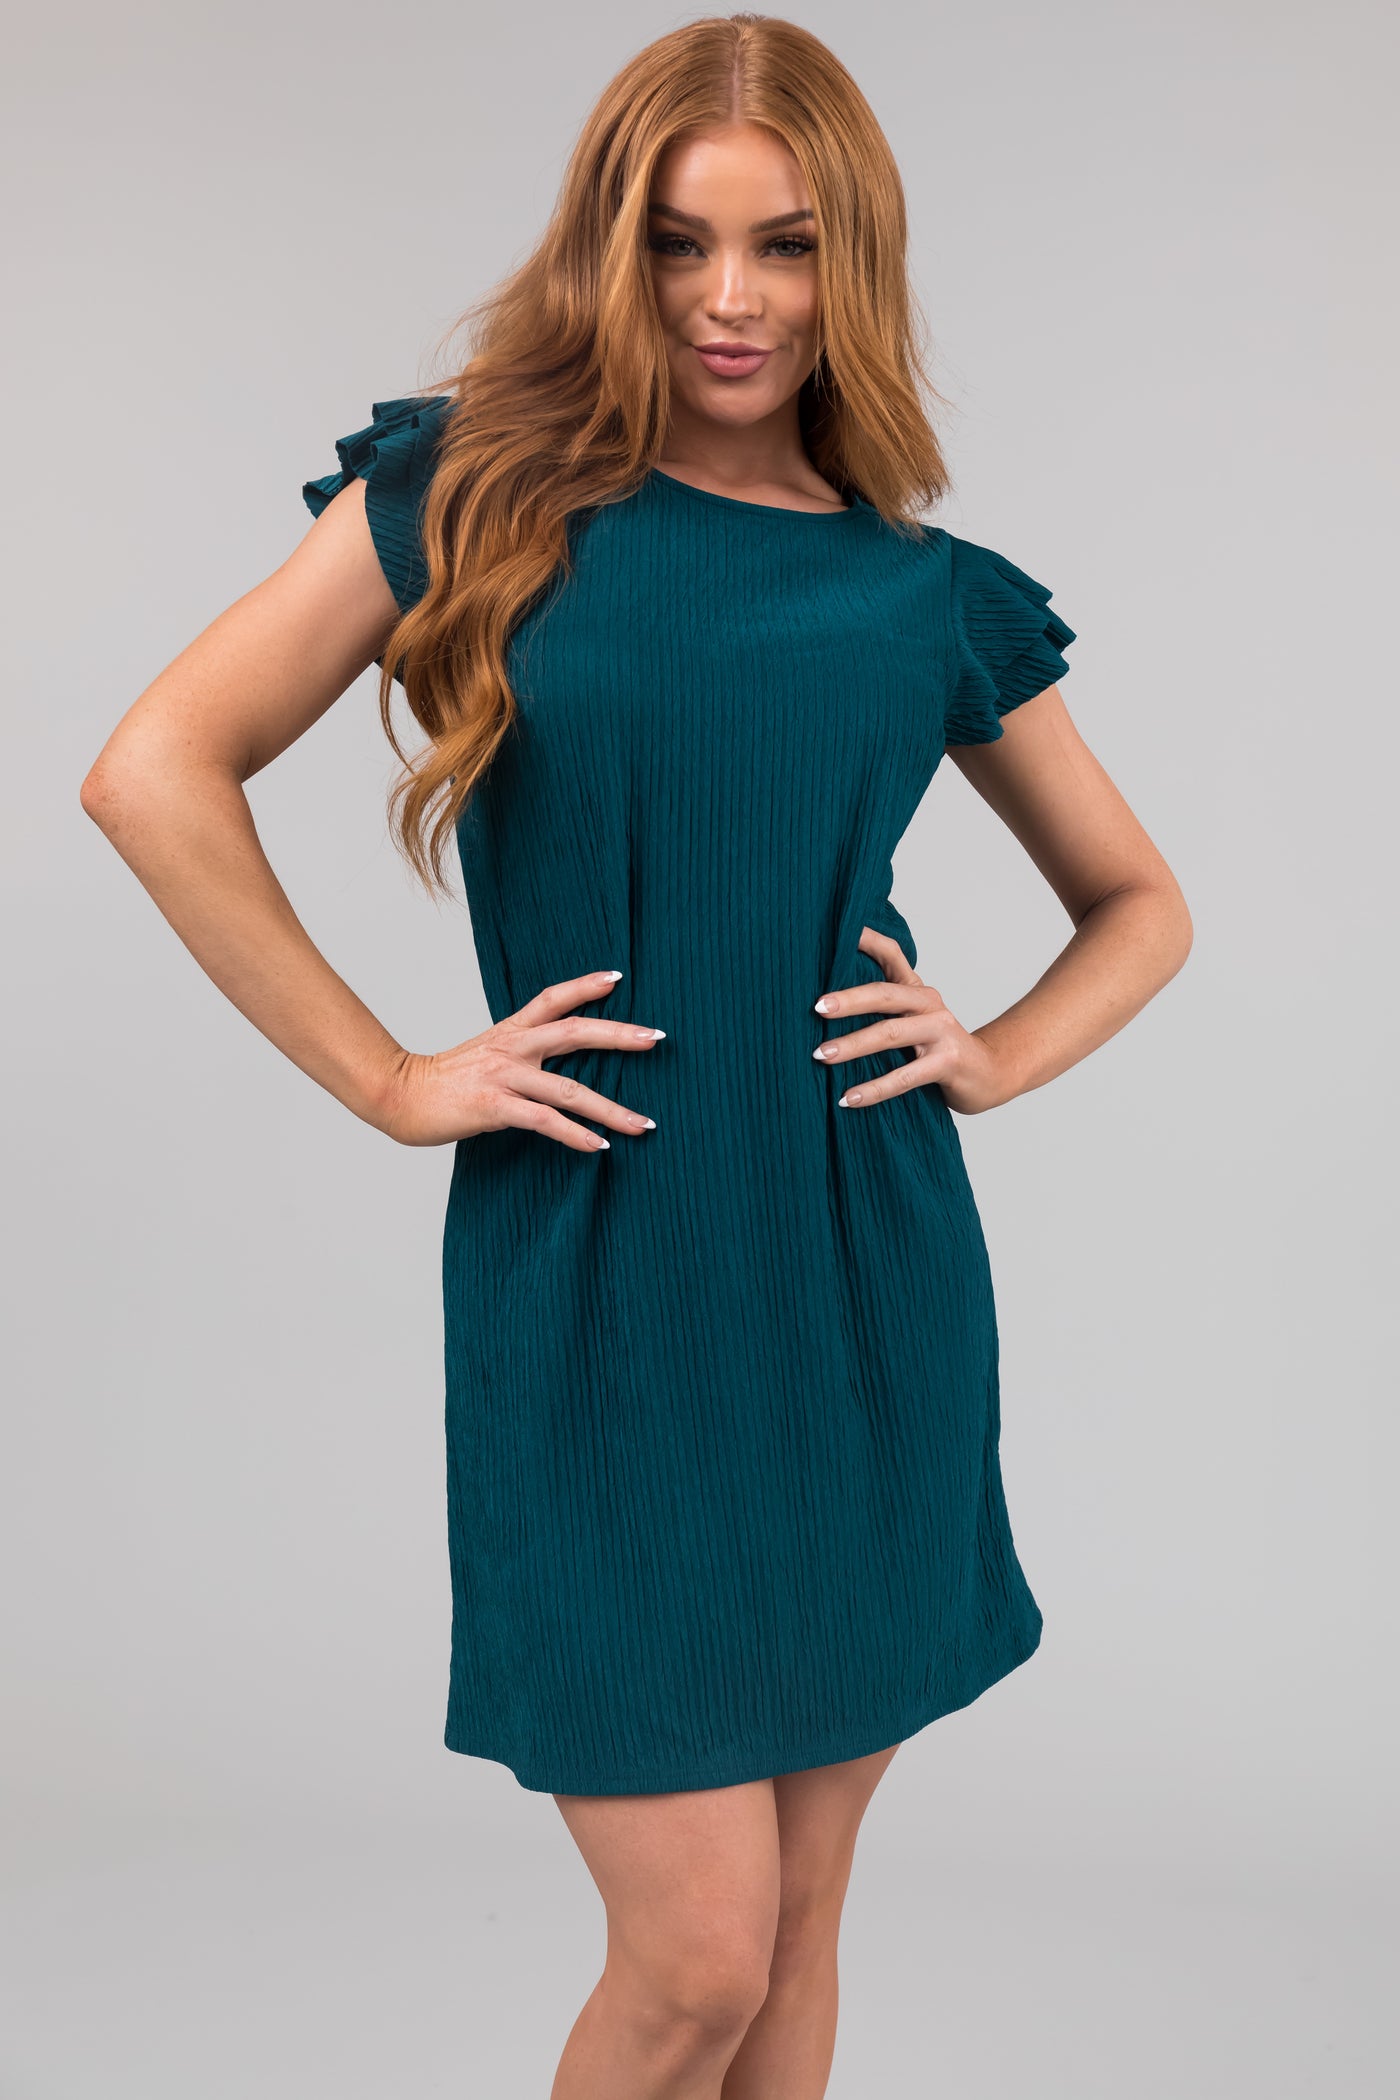 Lily Teal Frill Textured Shift Dress